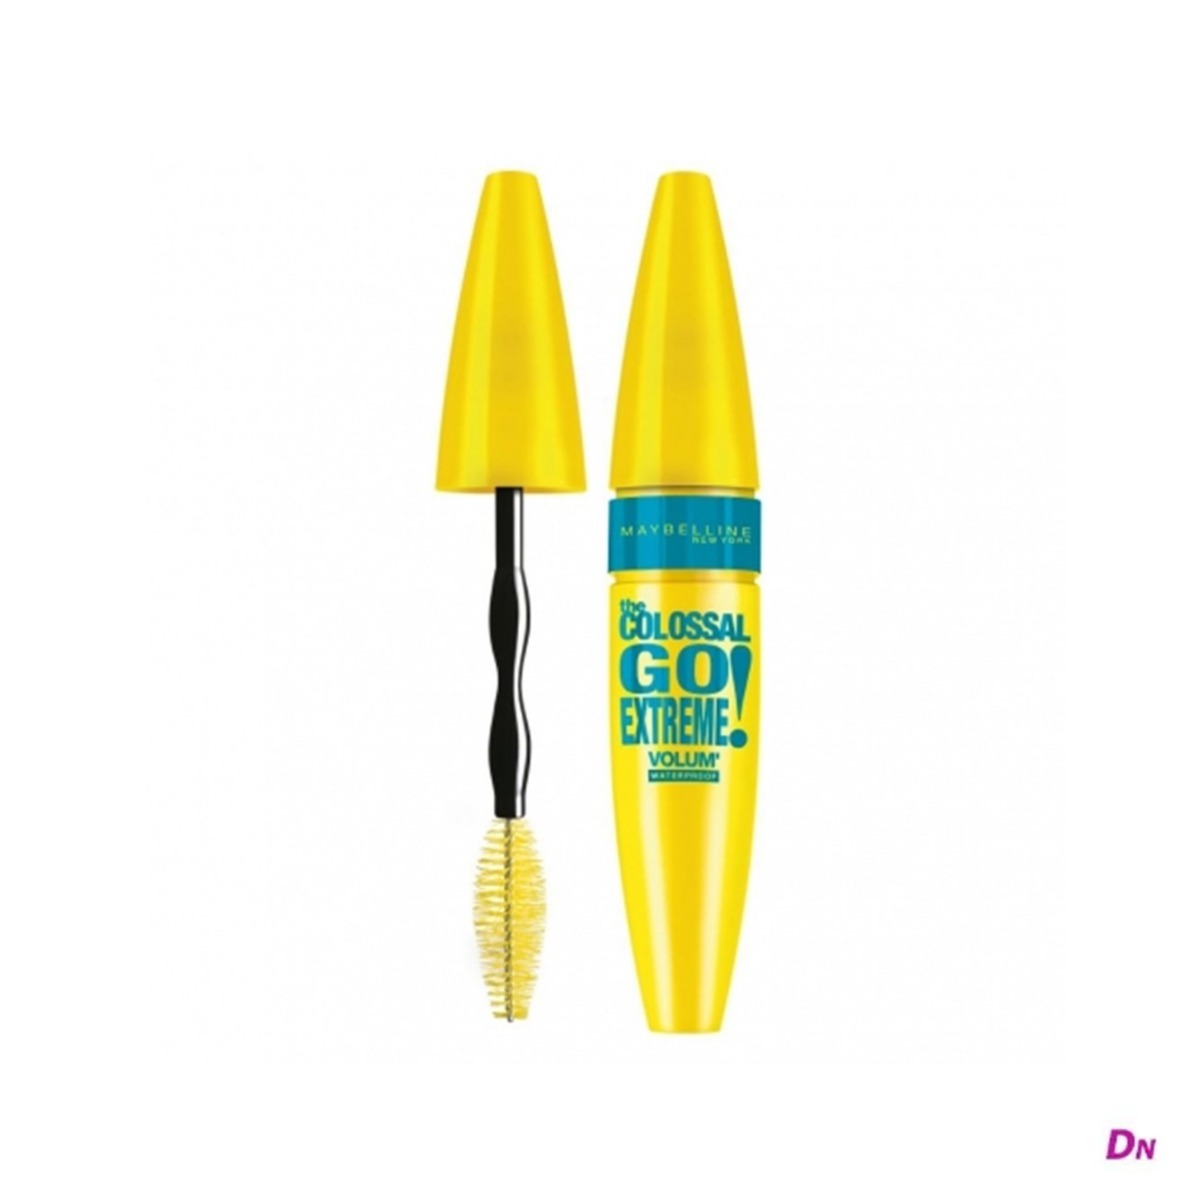 Maybelline colossal go extreme waterproof